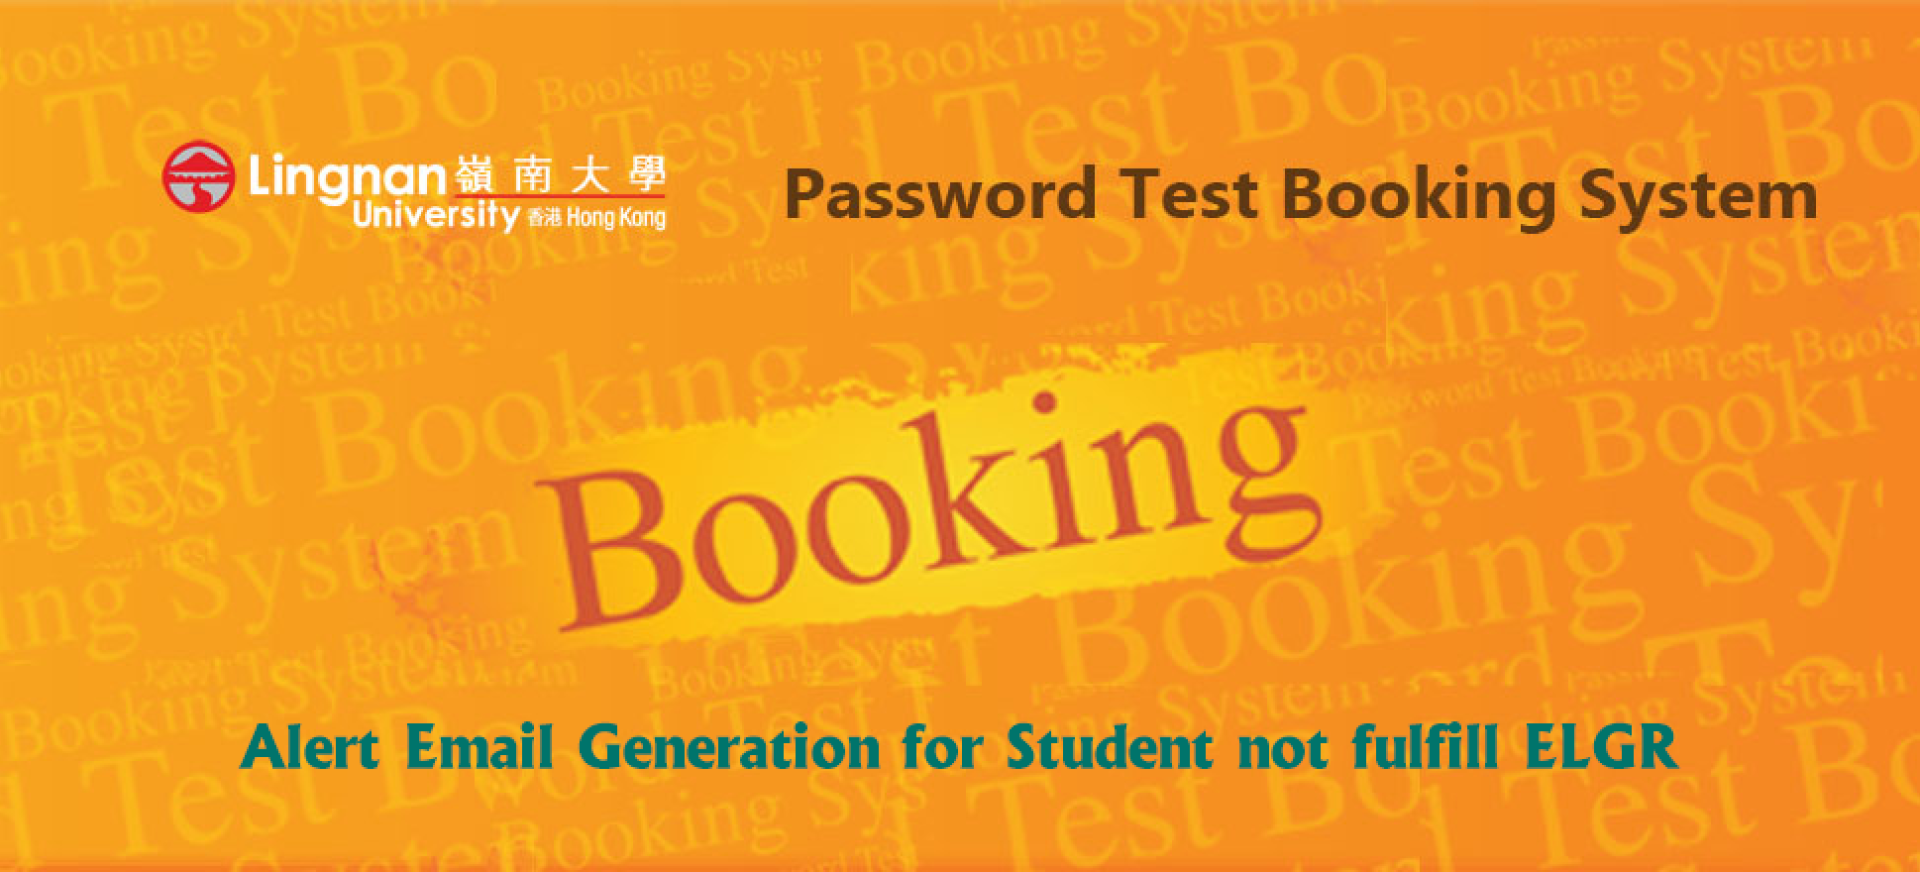 Issue 13 - PASSWORD Booking System – alert email generation for student not fulfill ELGR